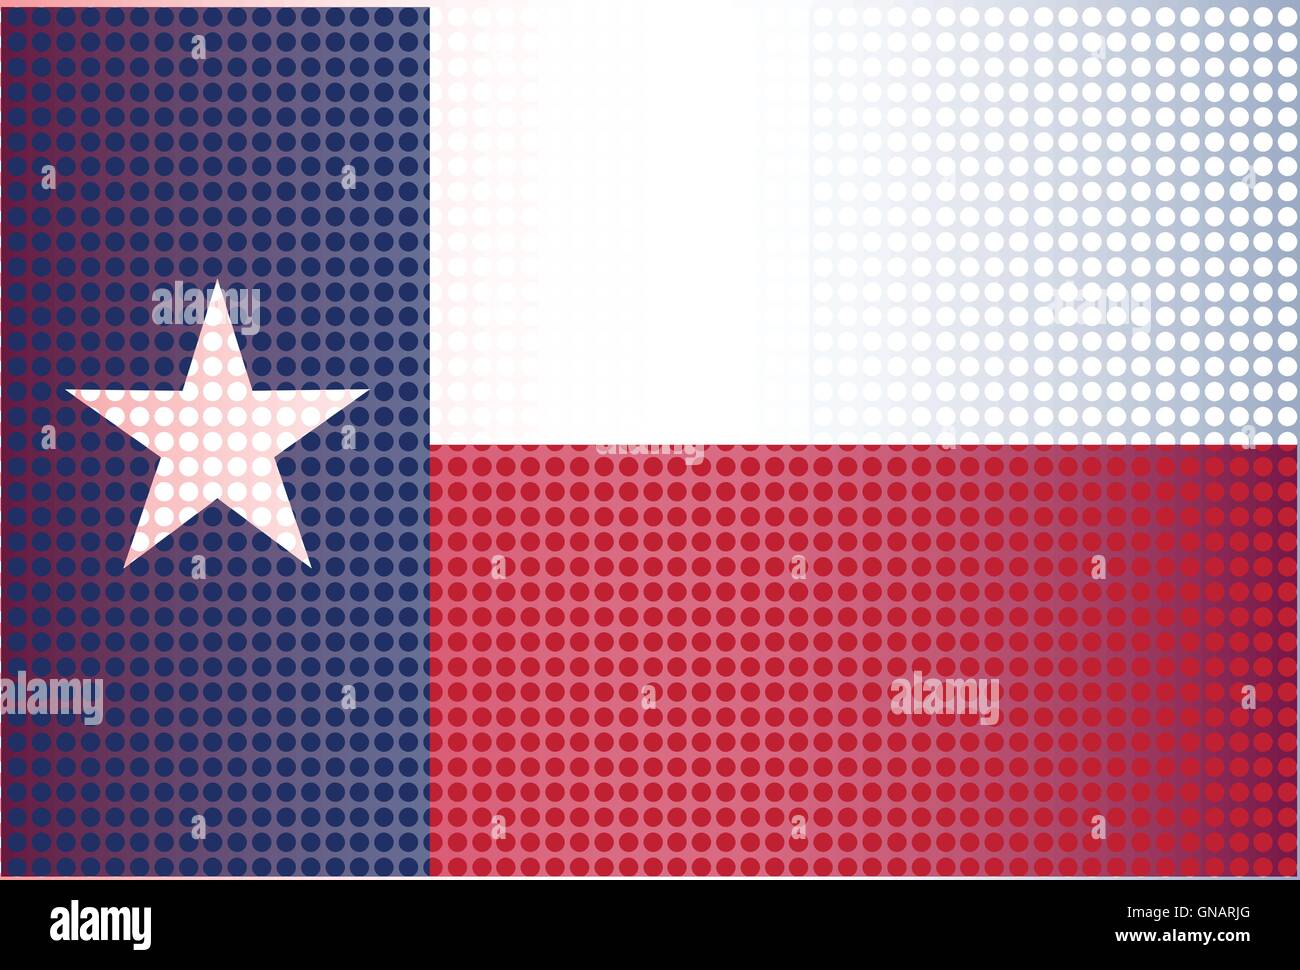 Texas State Doted Flag Stock Vector